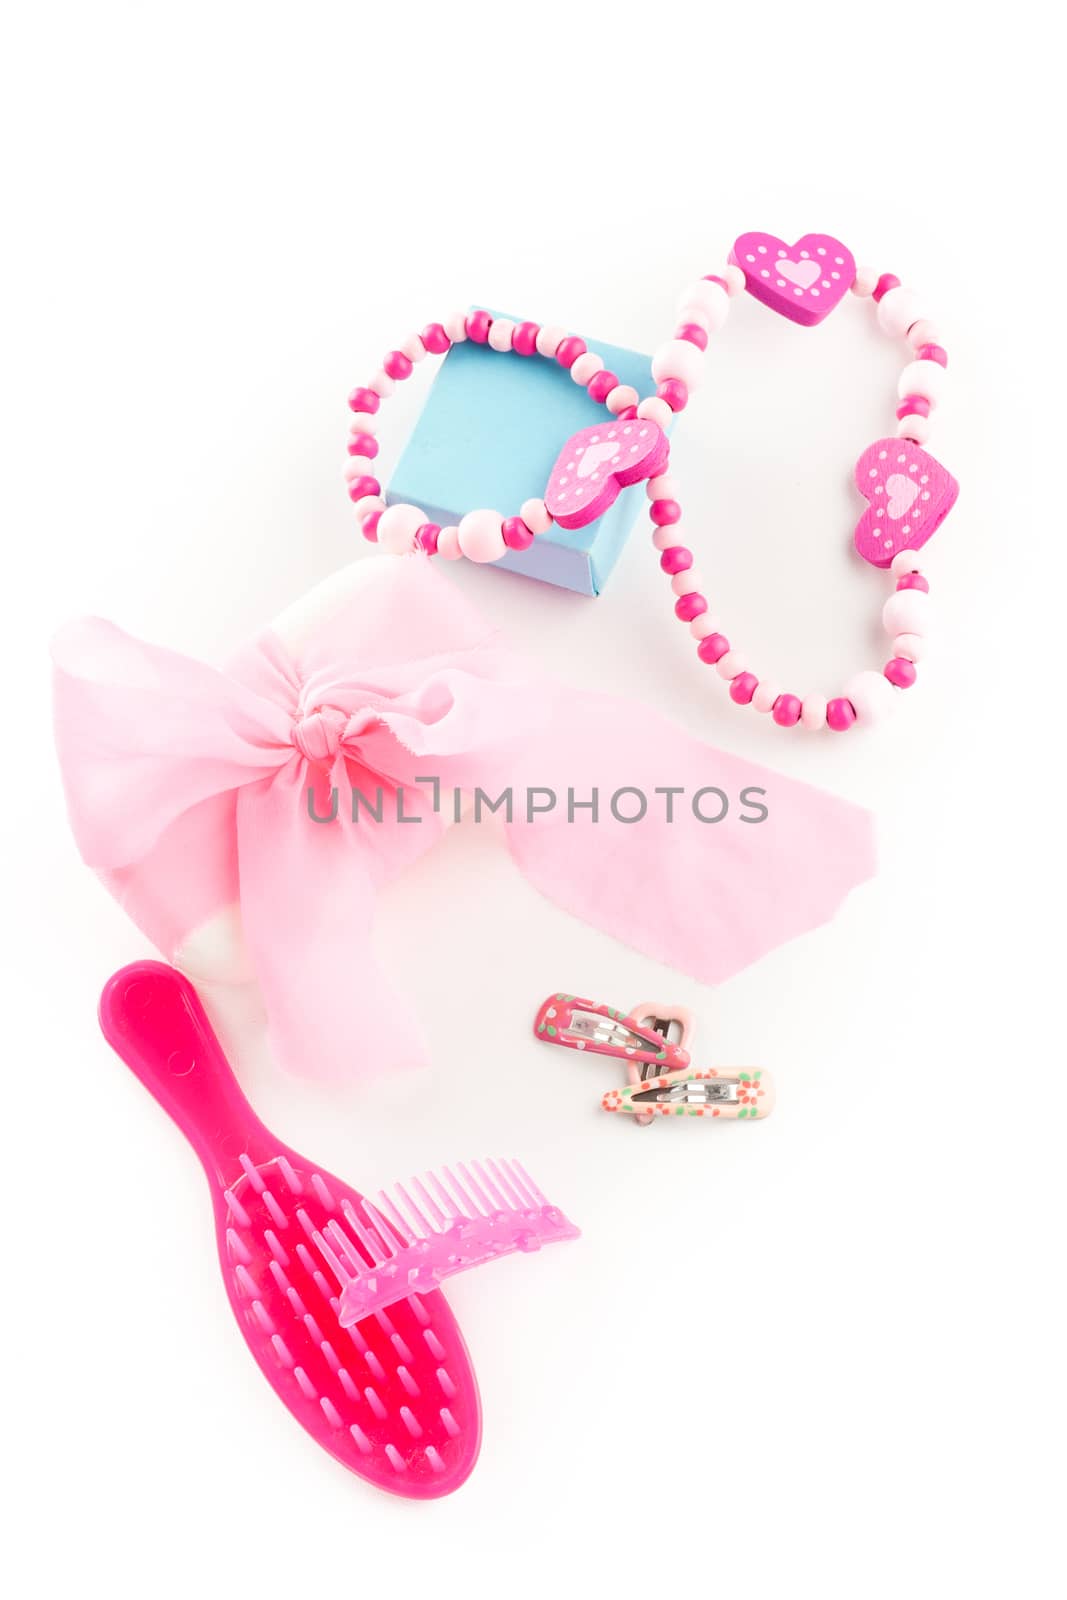 little girl beauty fashion pink accessories, necklace, soap, comb